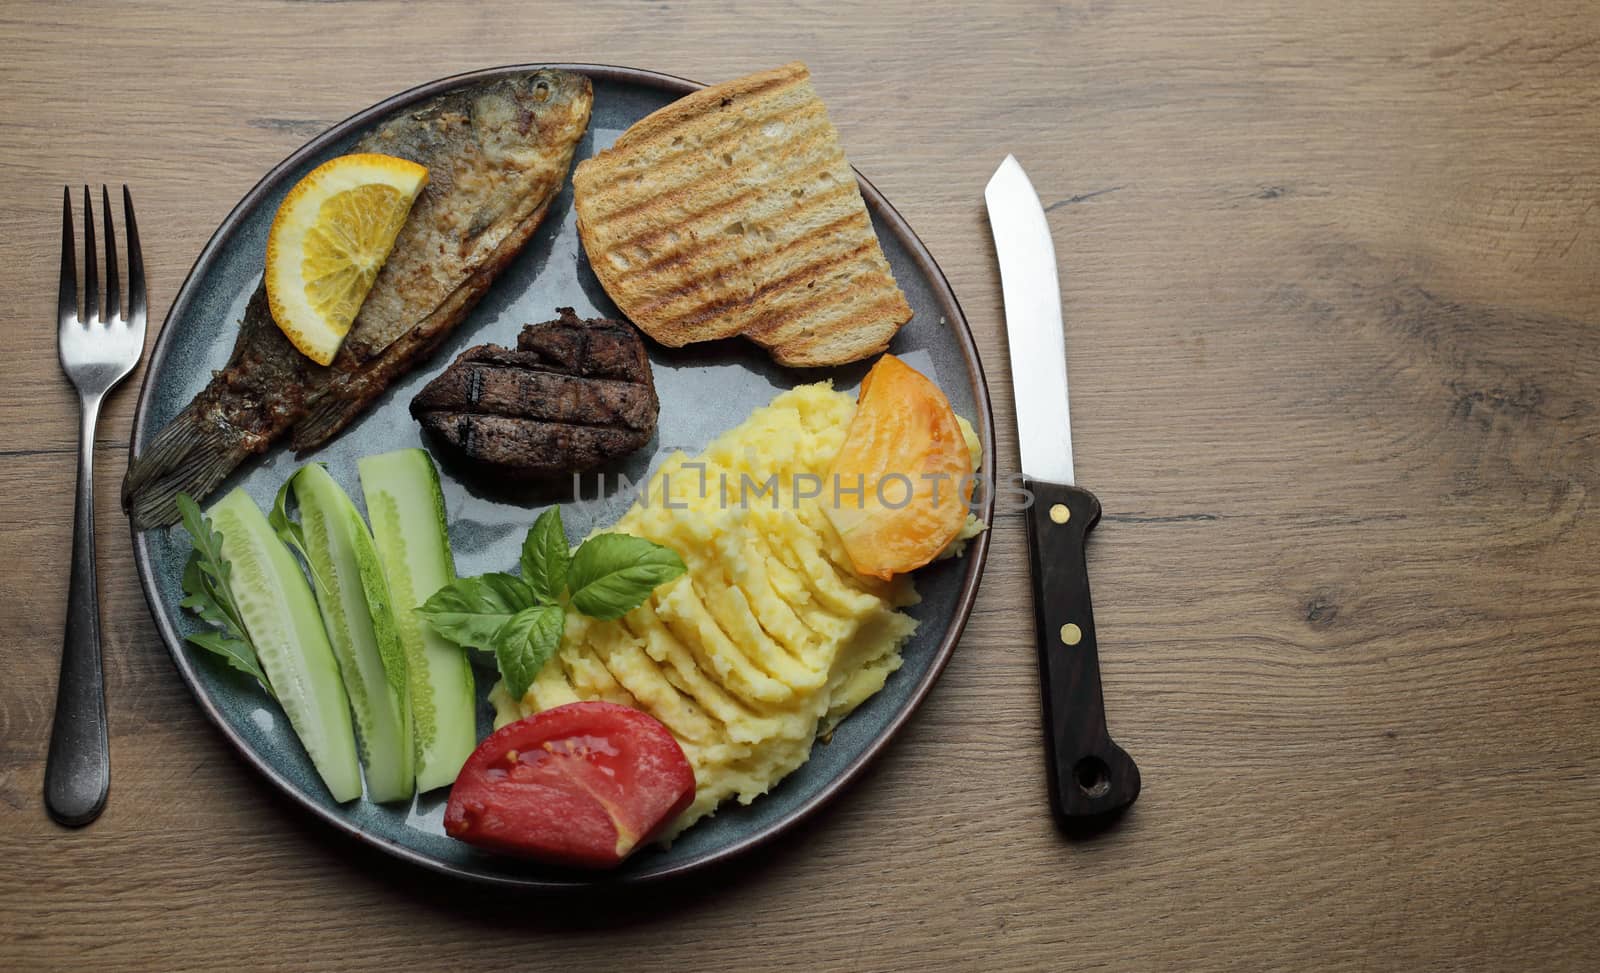 Fried fish, meat steak and vegetables on a plate. On a wooden table. High quality photo